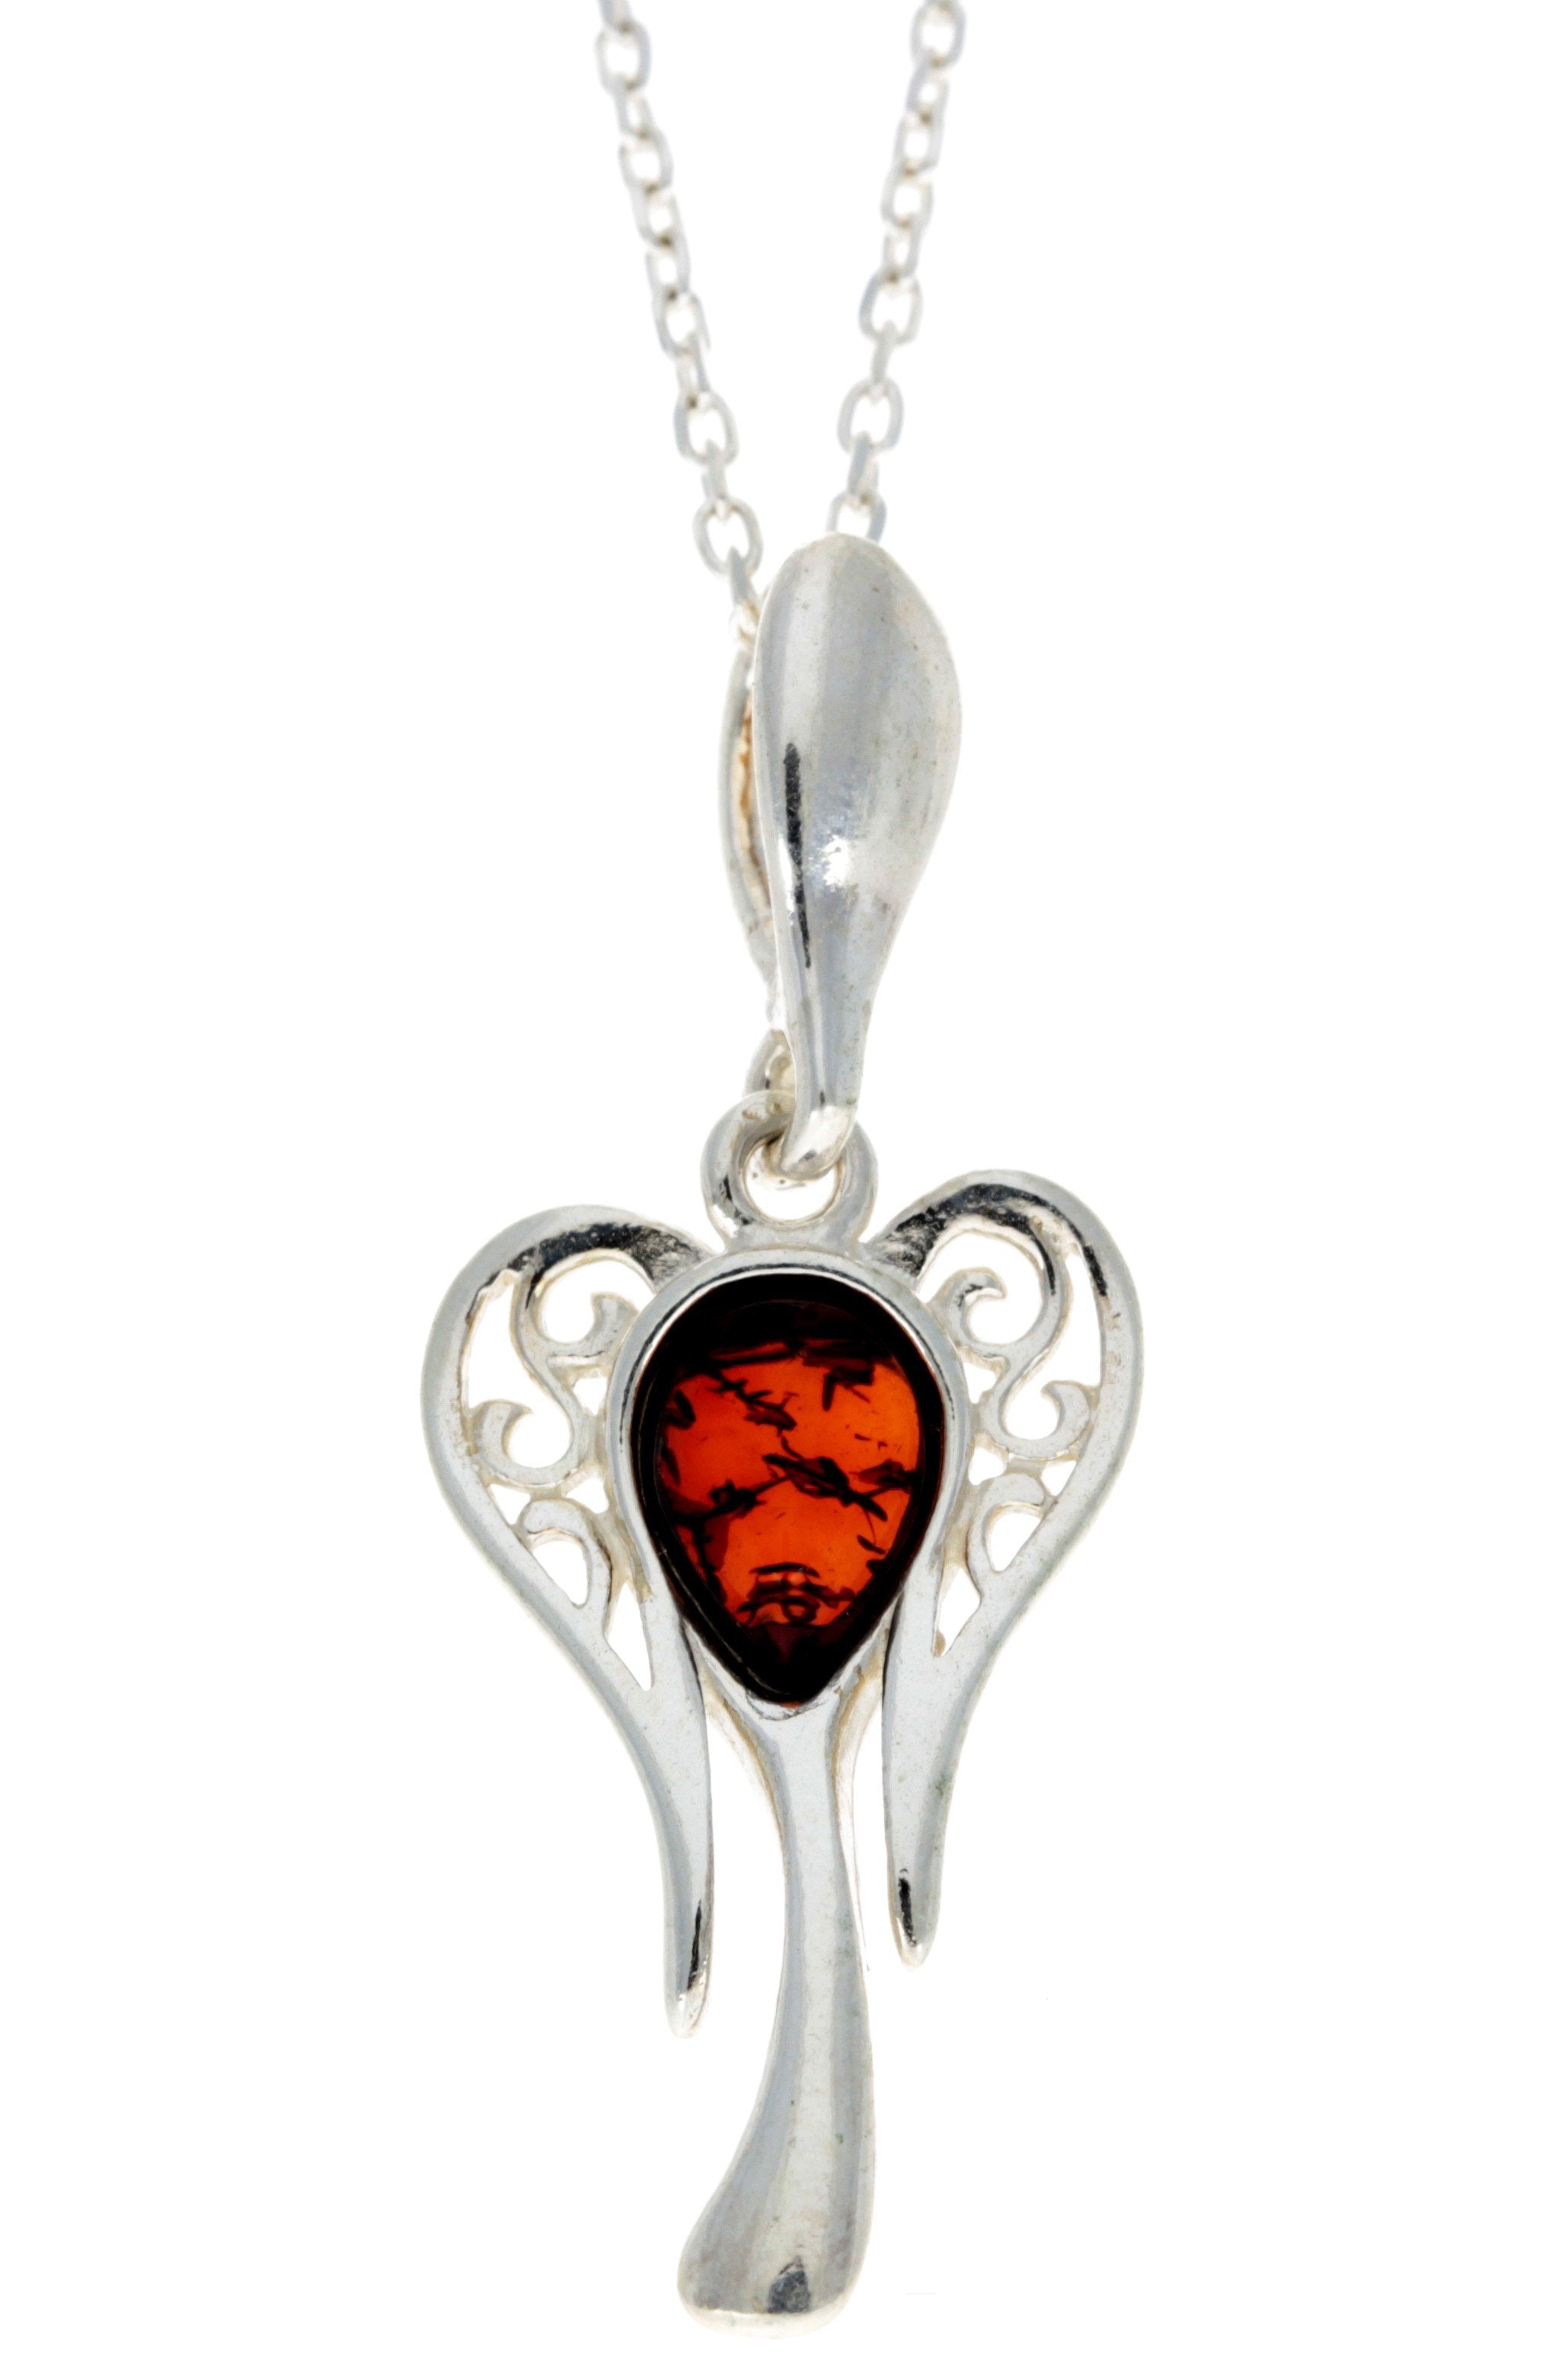 925 Sterling Silver Lucky Angel with Baltic Amber - GL383